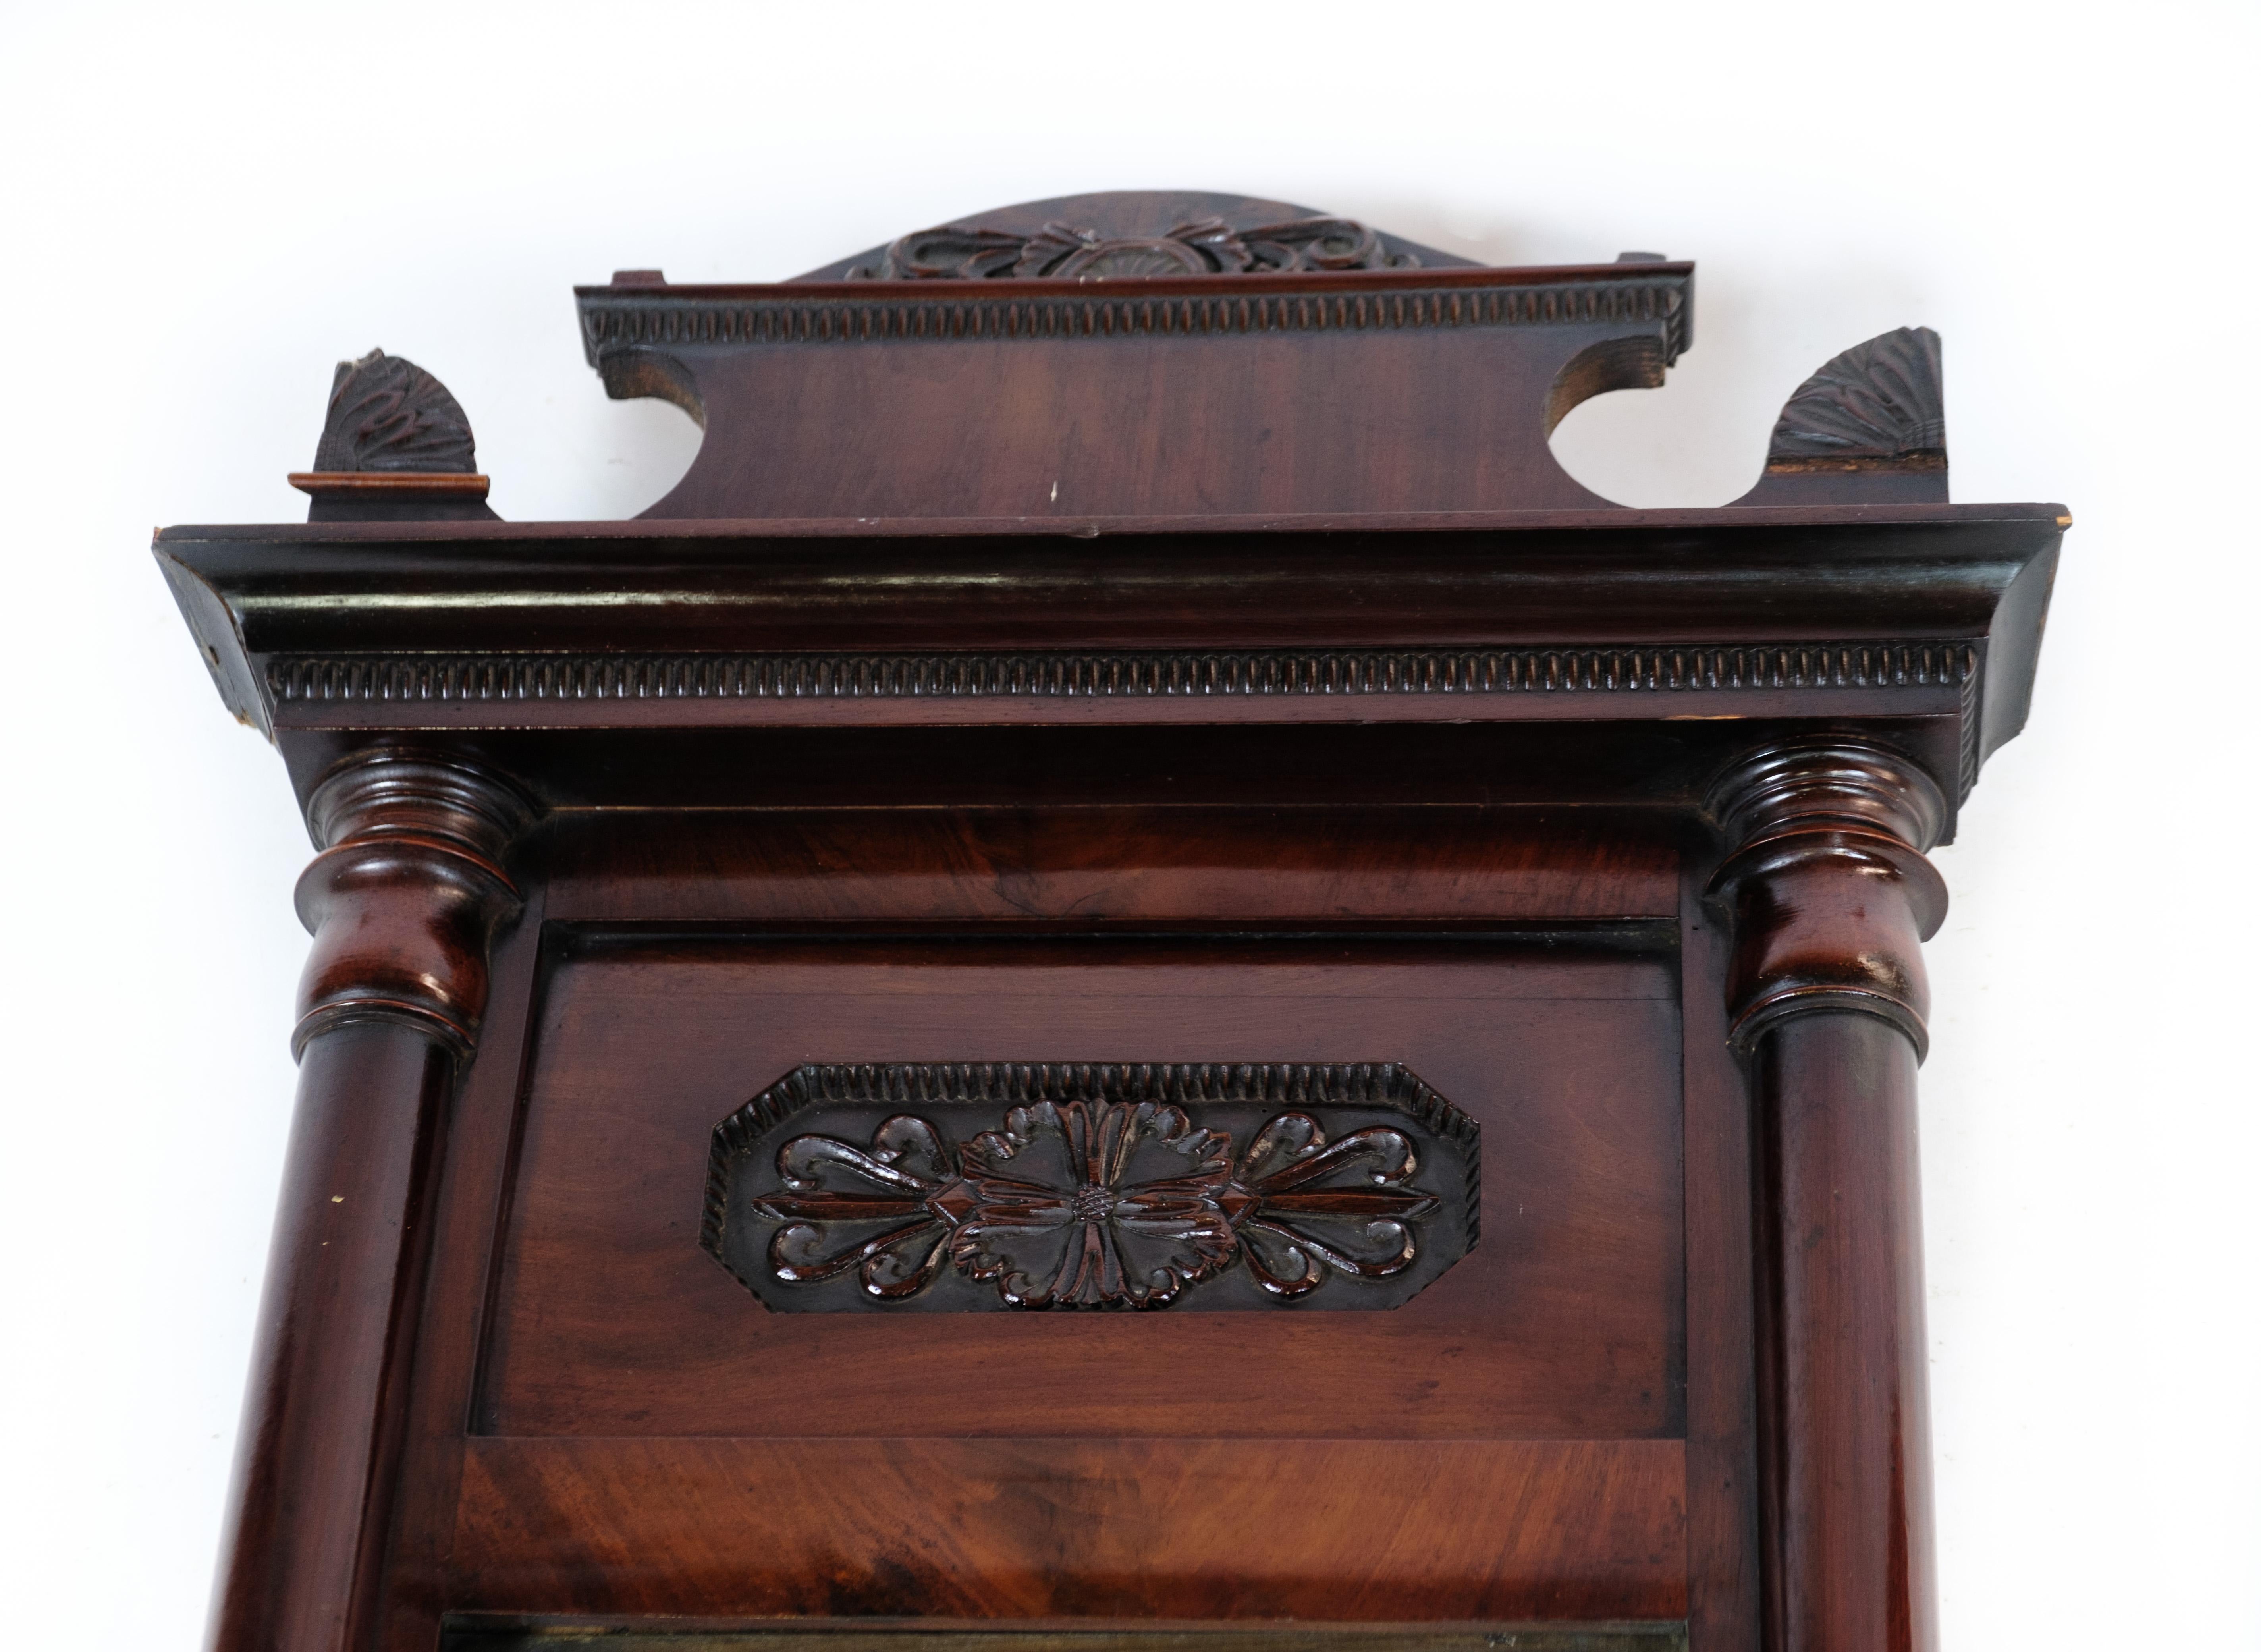 Antique mirror in mahogany wood from the late Empire period from around the 1840s.
Dimensions in cm: H:127 W:53